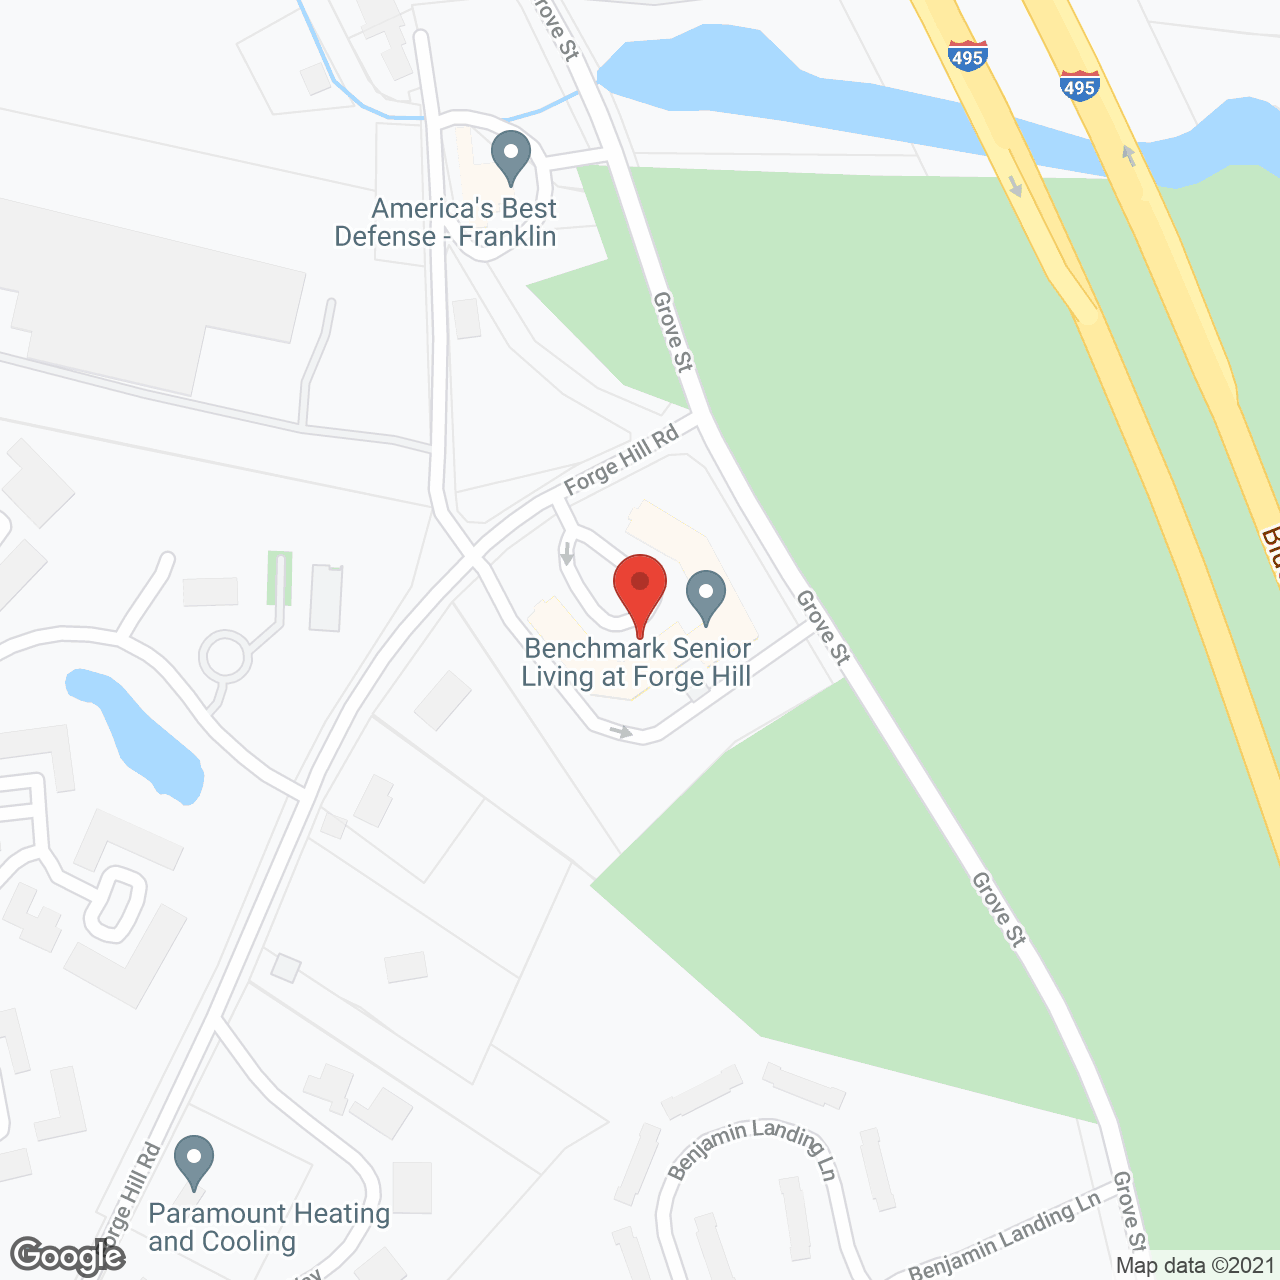 Benchmark Senior Living at Forge Hill in google map